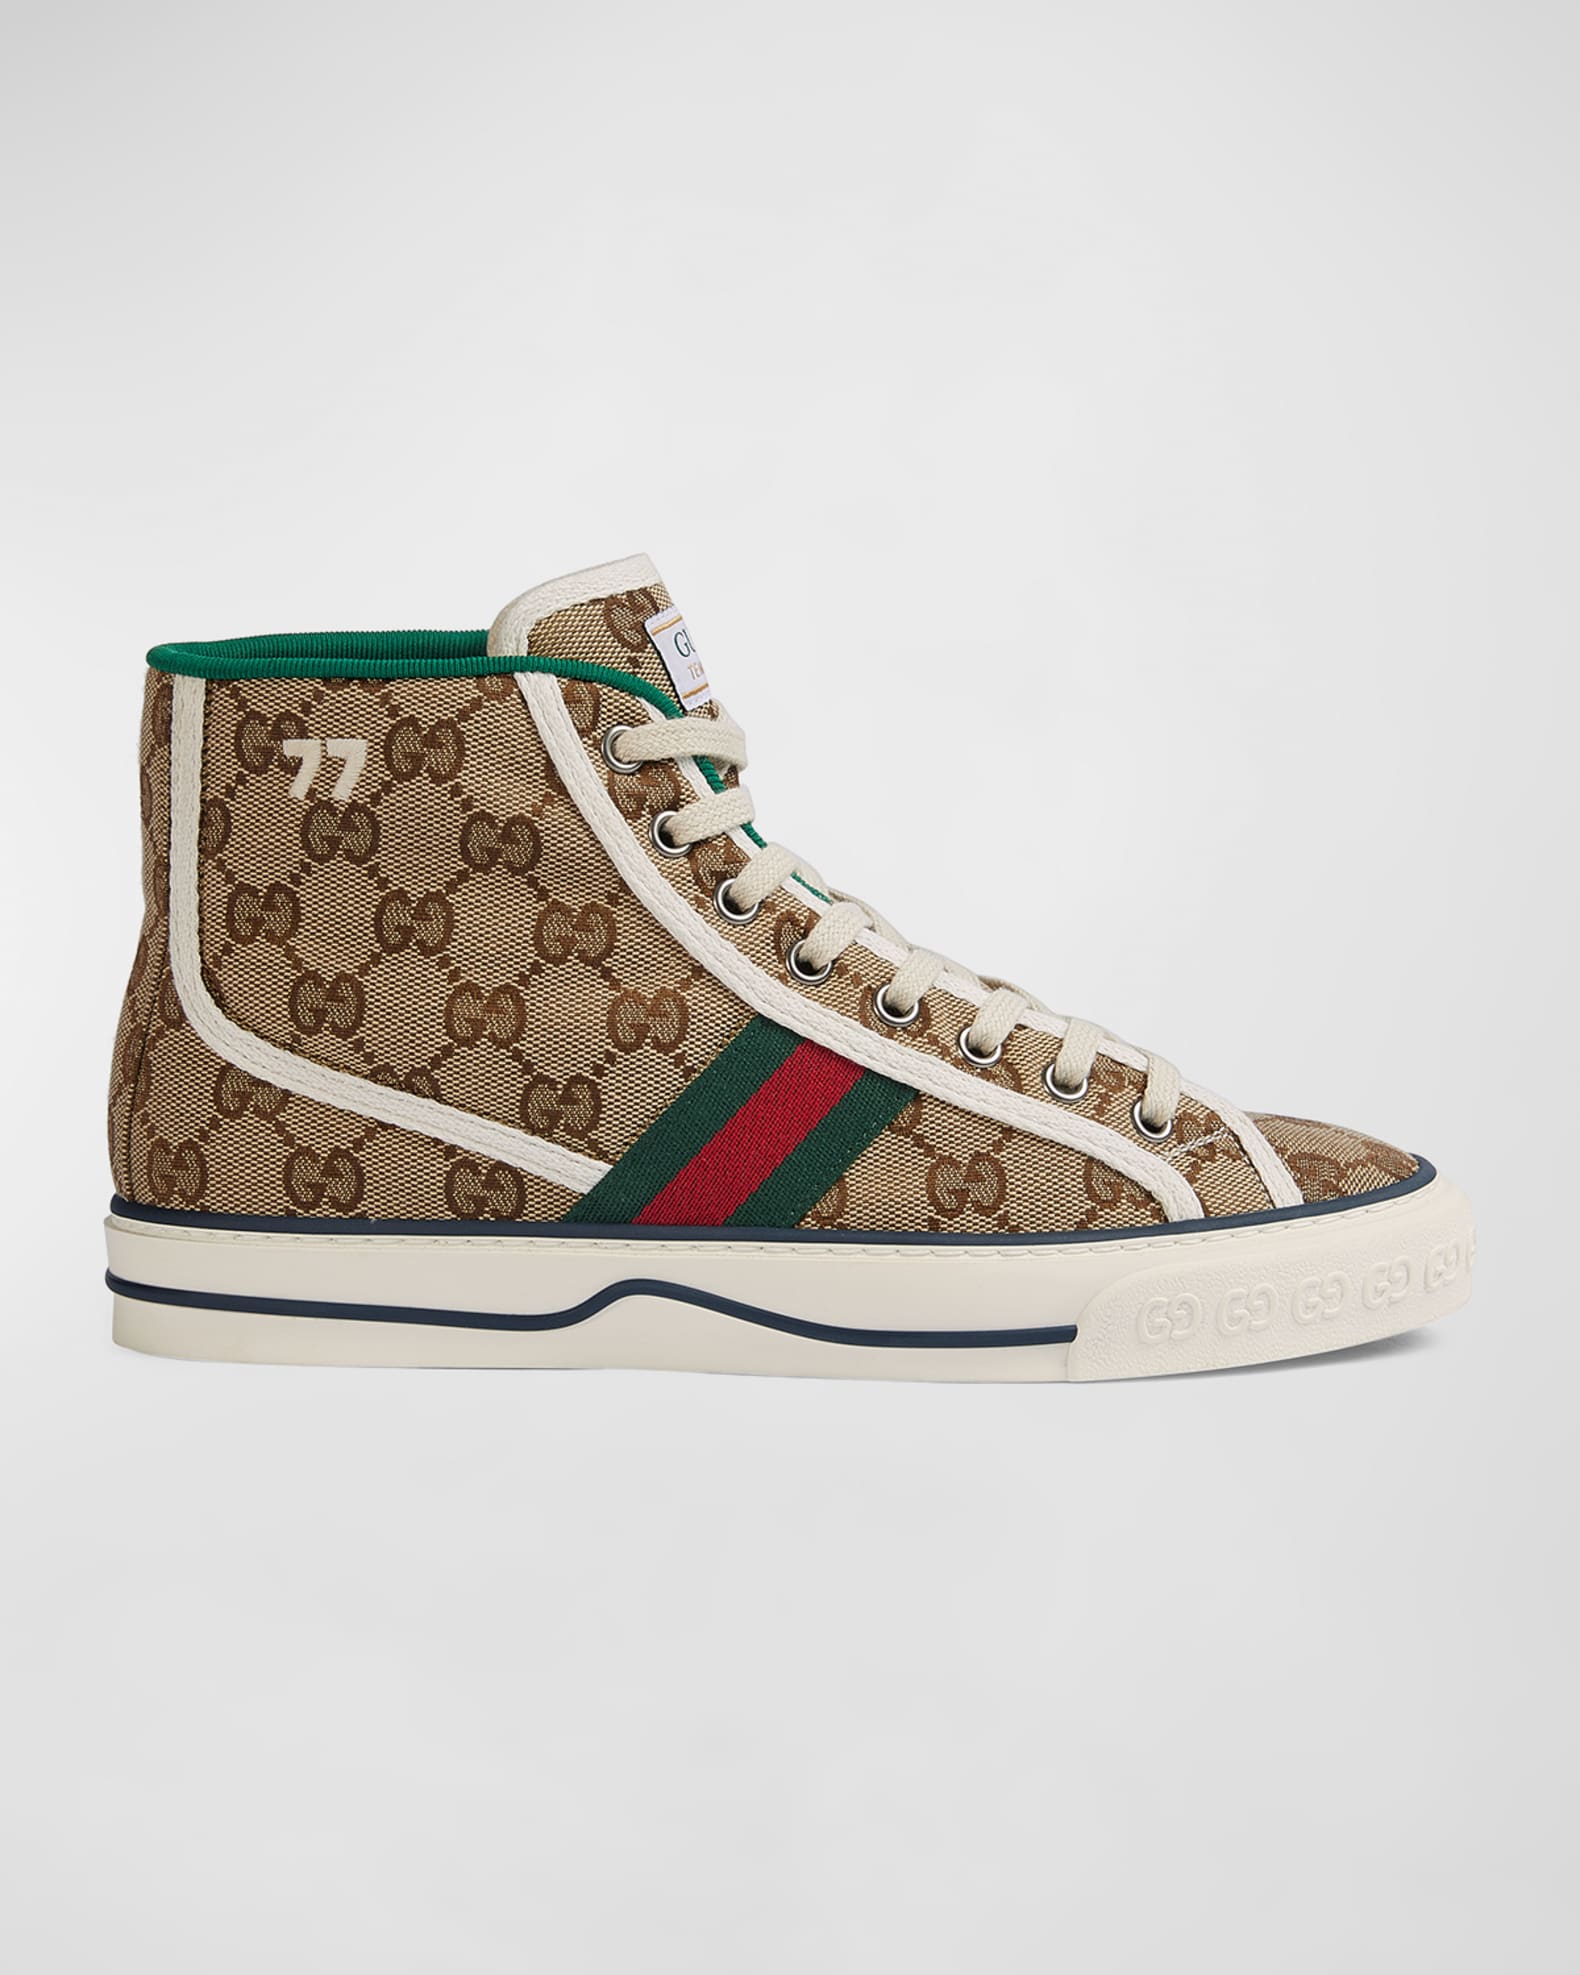 Gucci Limited Edition Beige GG Canvas Croc Embossed Tom Ford